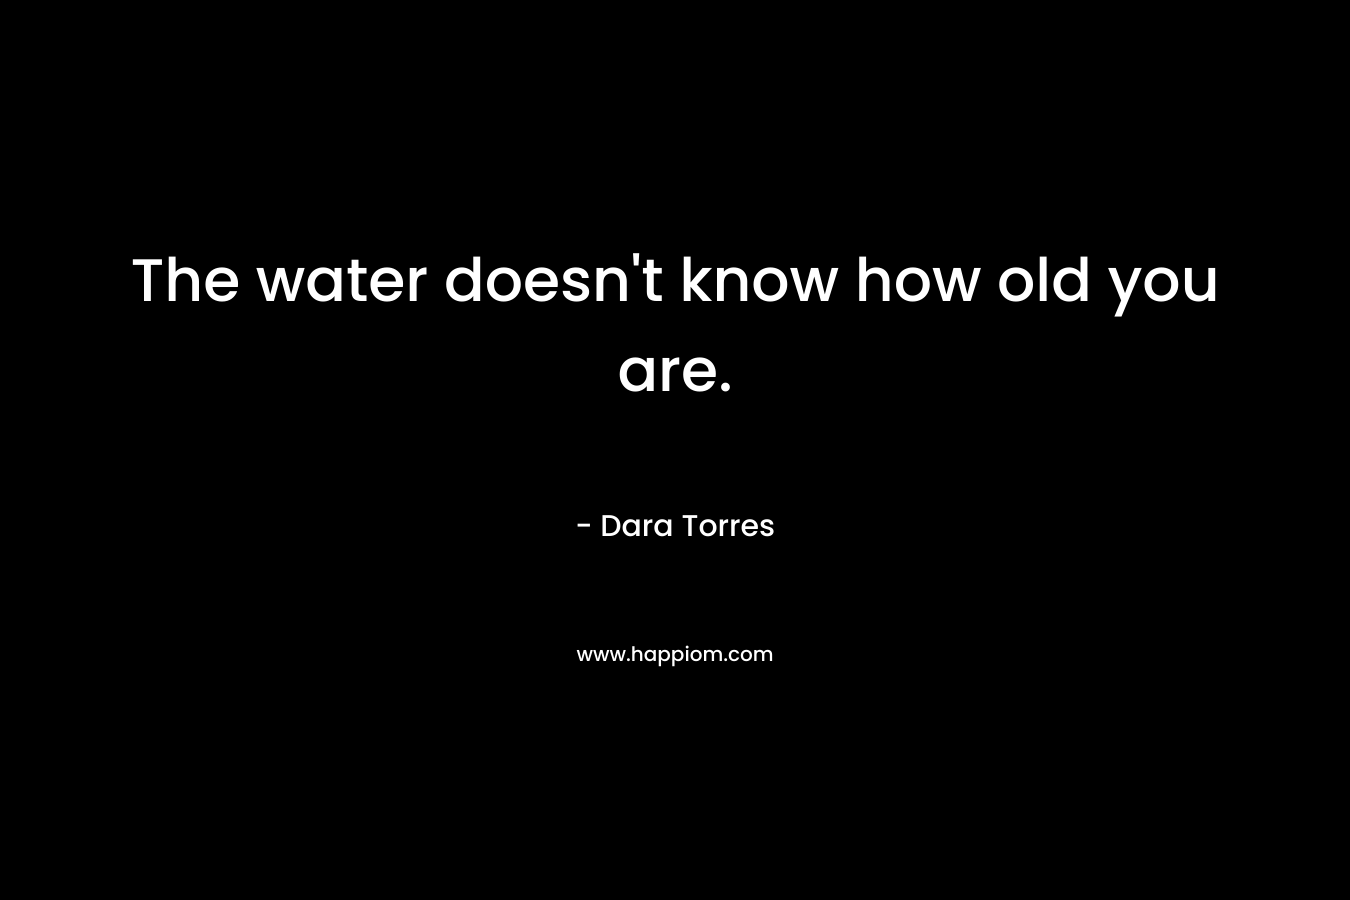 The water doesn't know how old you are.